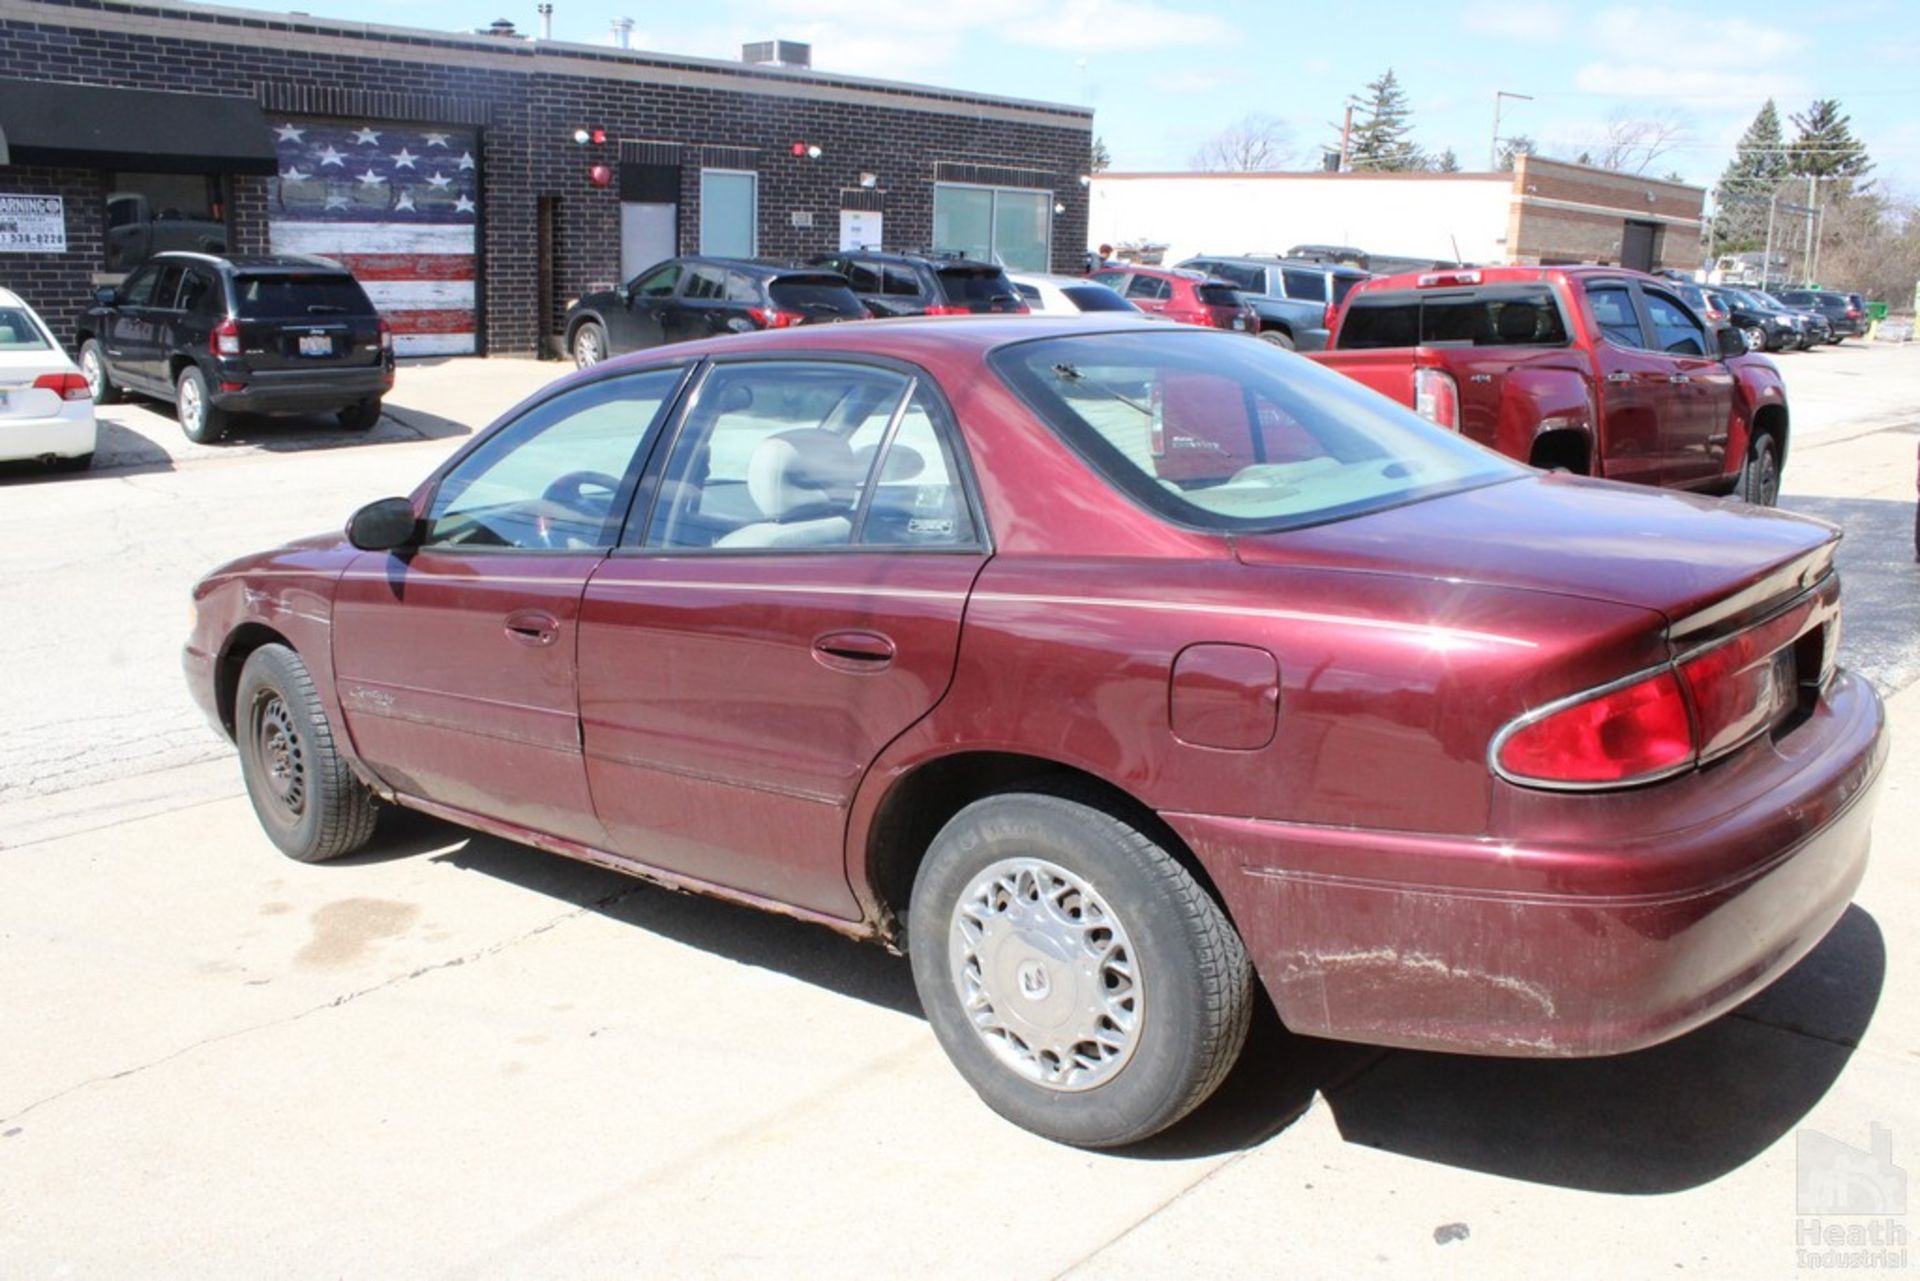 2001 BUICK MODEL CENTURY AUTOMOBILE, VIN: 2G4AS52J511184800, AUTOMATIC TRANSMISSION, CAN'T READ - Image 4 of 7